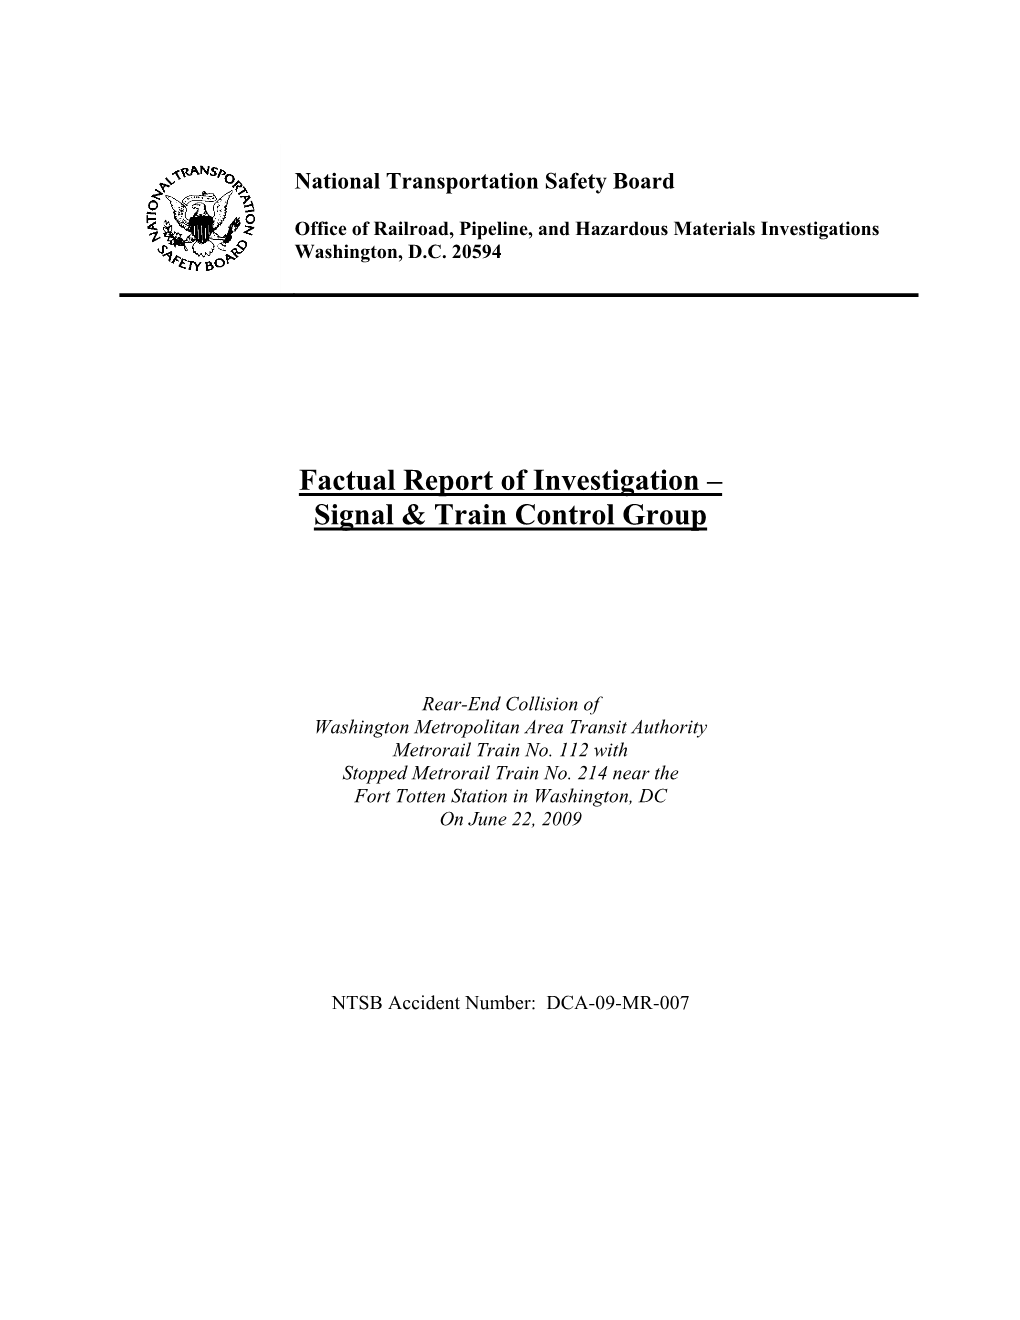 Factual Report of Investigation – Signal & Train Control Group